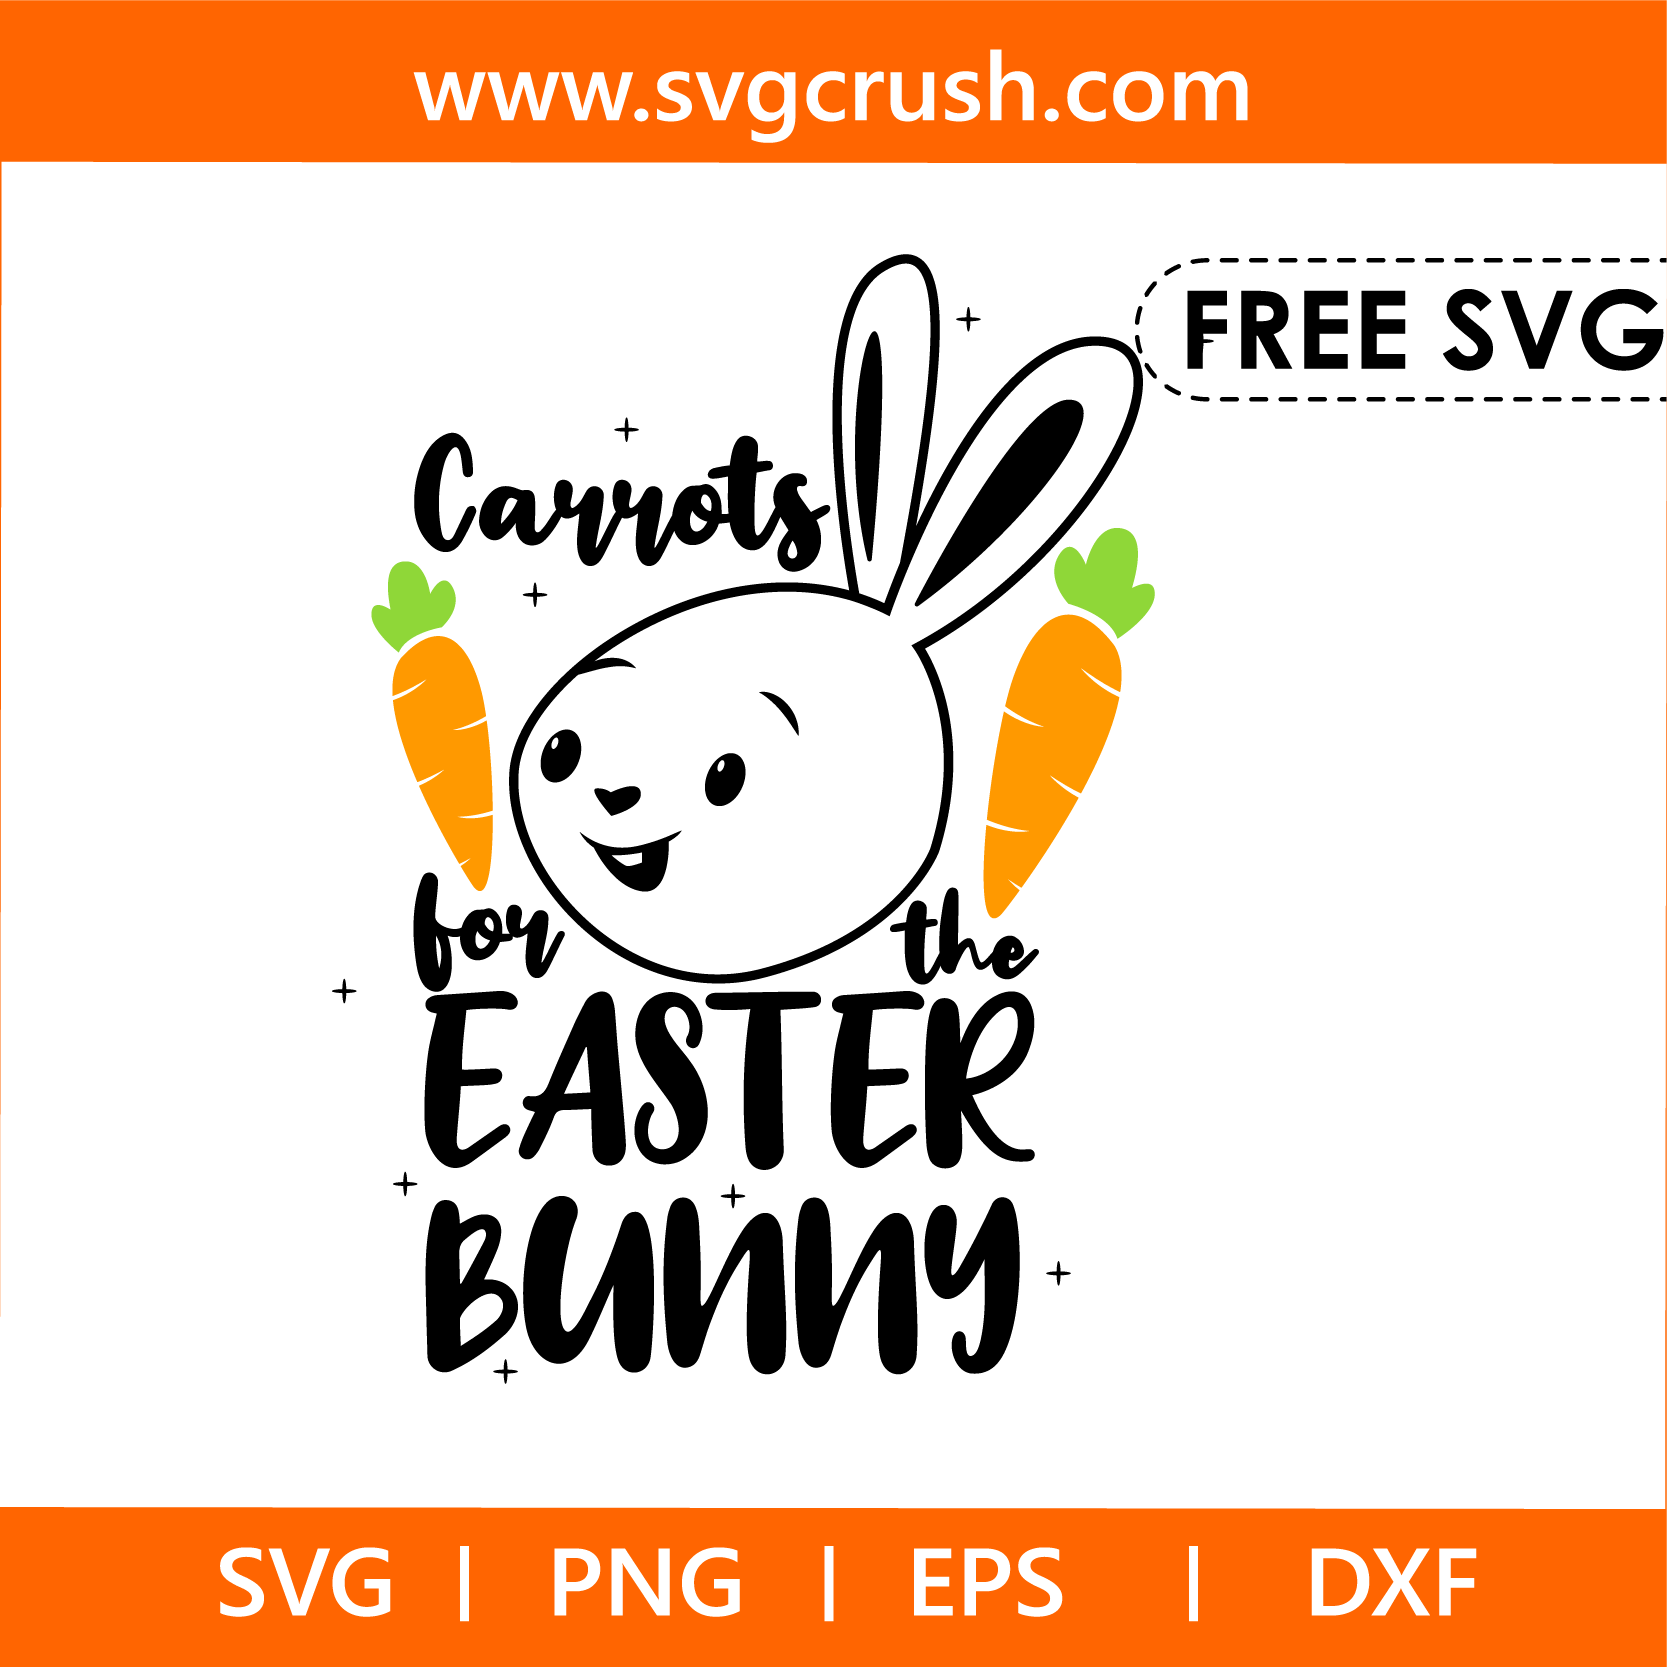 free carrots-for-the-easter-bunny-005 svg